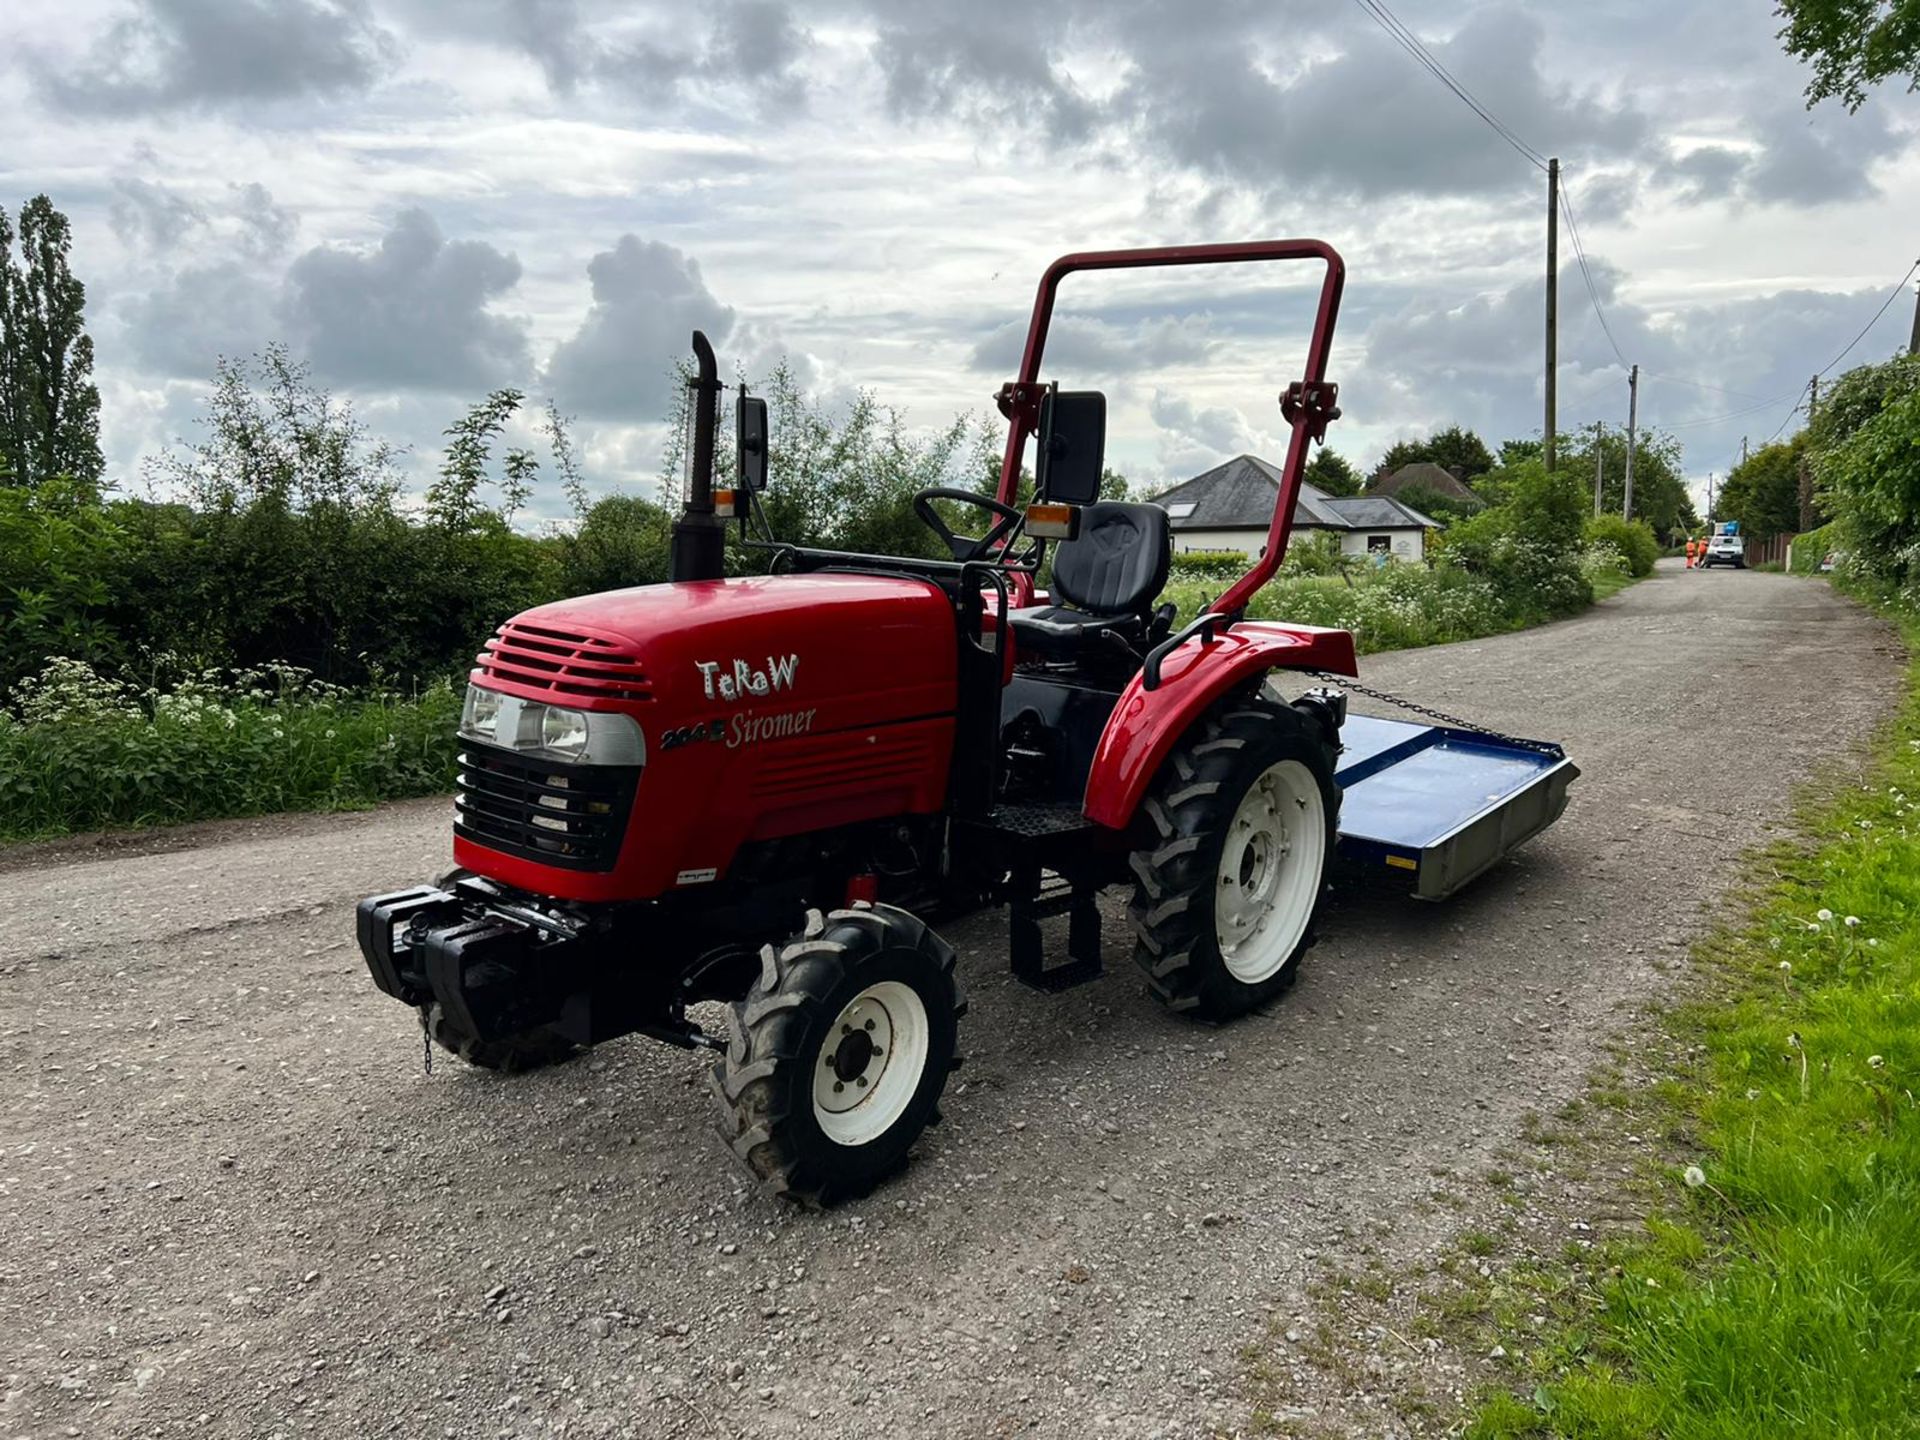 Siromer 204E 20HP 4WD Compact Tractor With 5FT Beaco Grass Topper - 68 Plate """"PLUS VAT"""" - Image 3 of 22